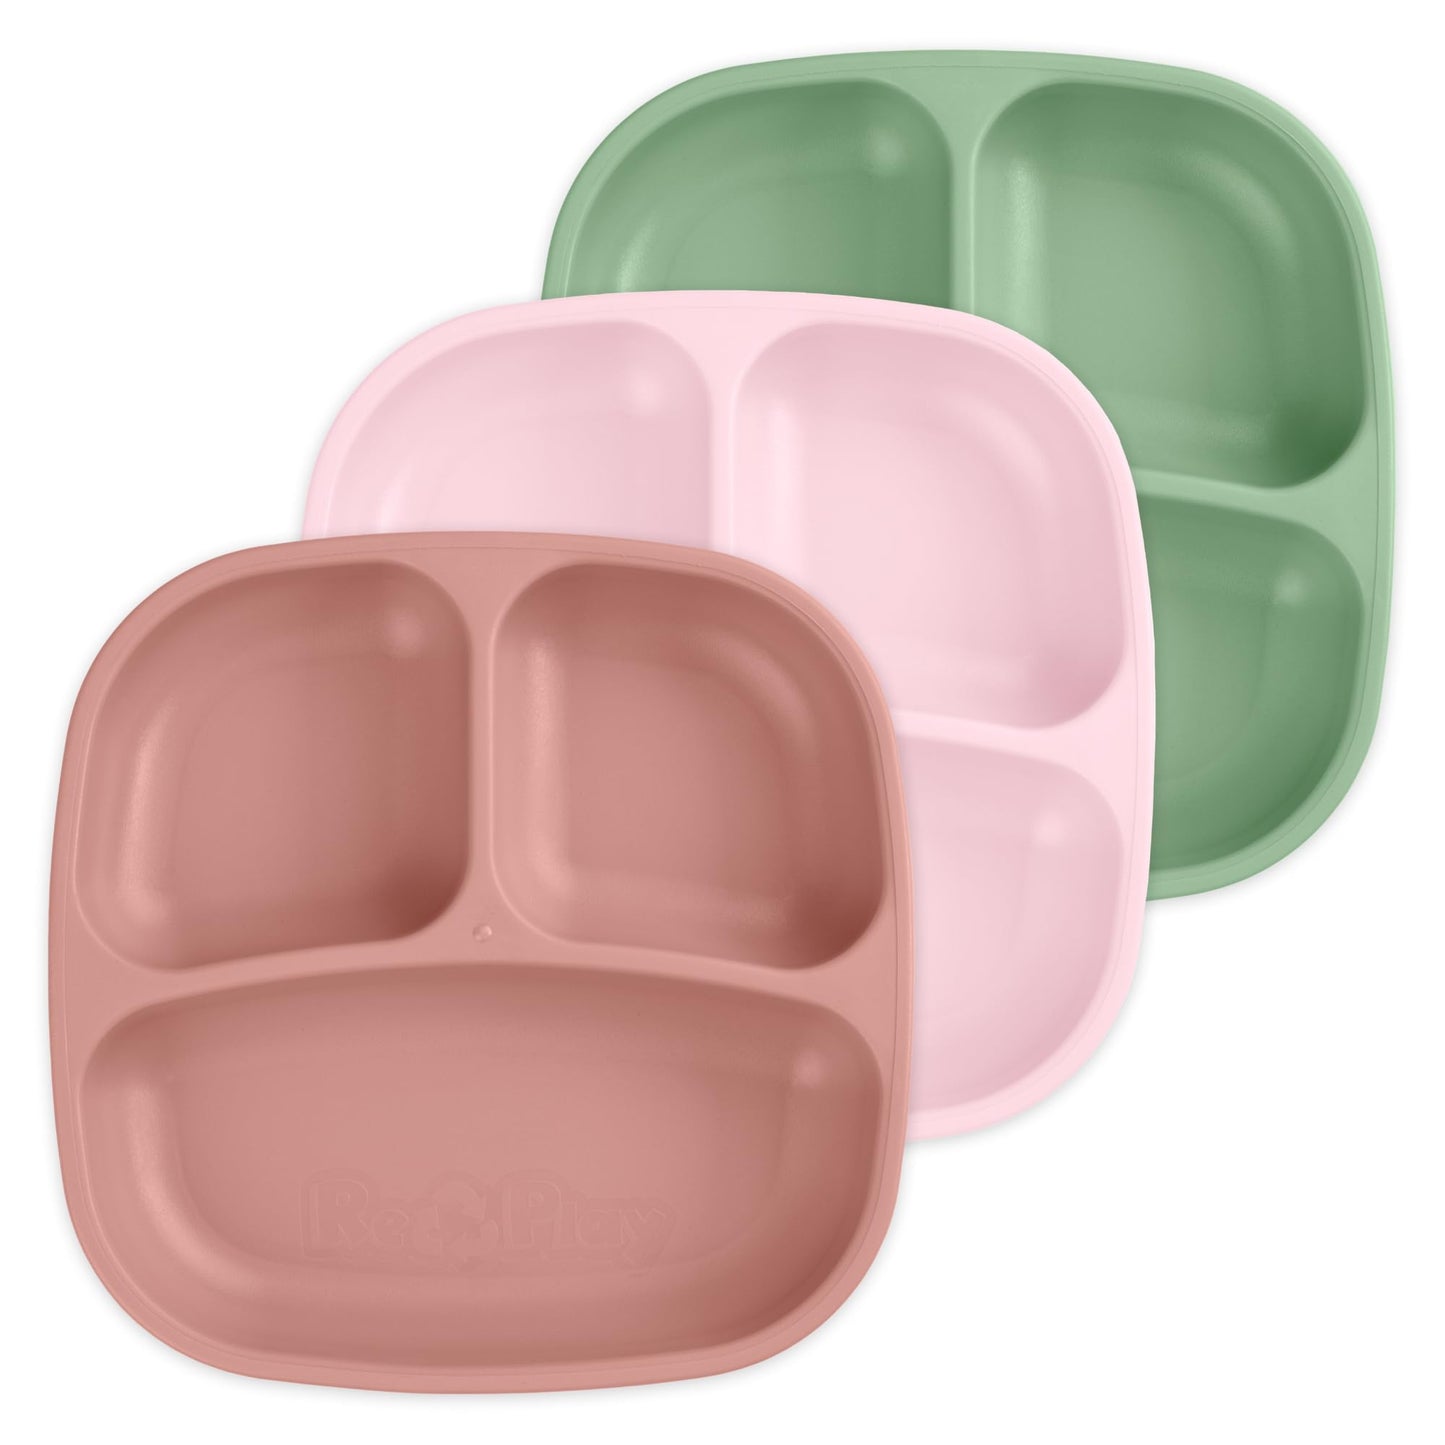 Re-Play Made in USA 7" Deep Walled Divided Plates for Kids, Set of 3 Without Lid - Reusable 3 Compartment Plates, Dishwasher and Microwave Safe - 7.37" x 7.37" x 1.25", Modern Aqua